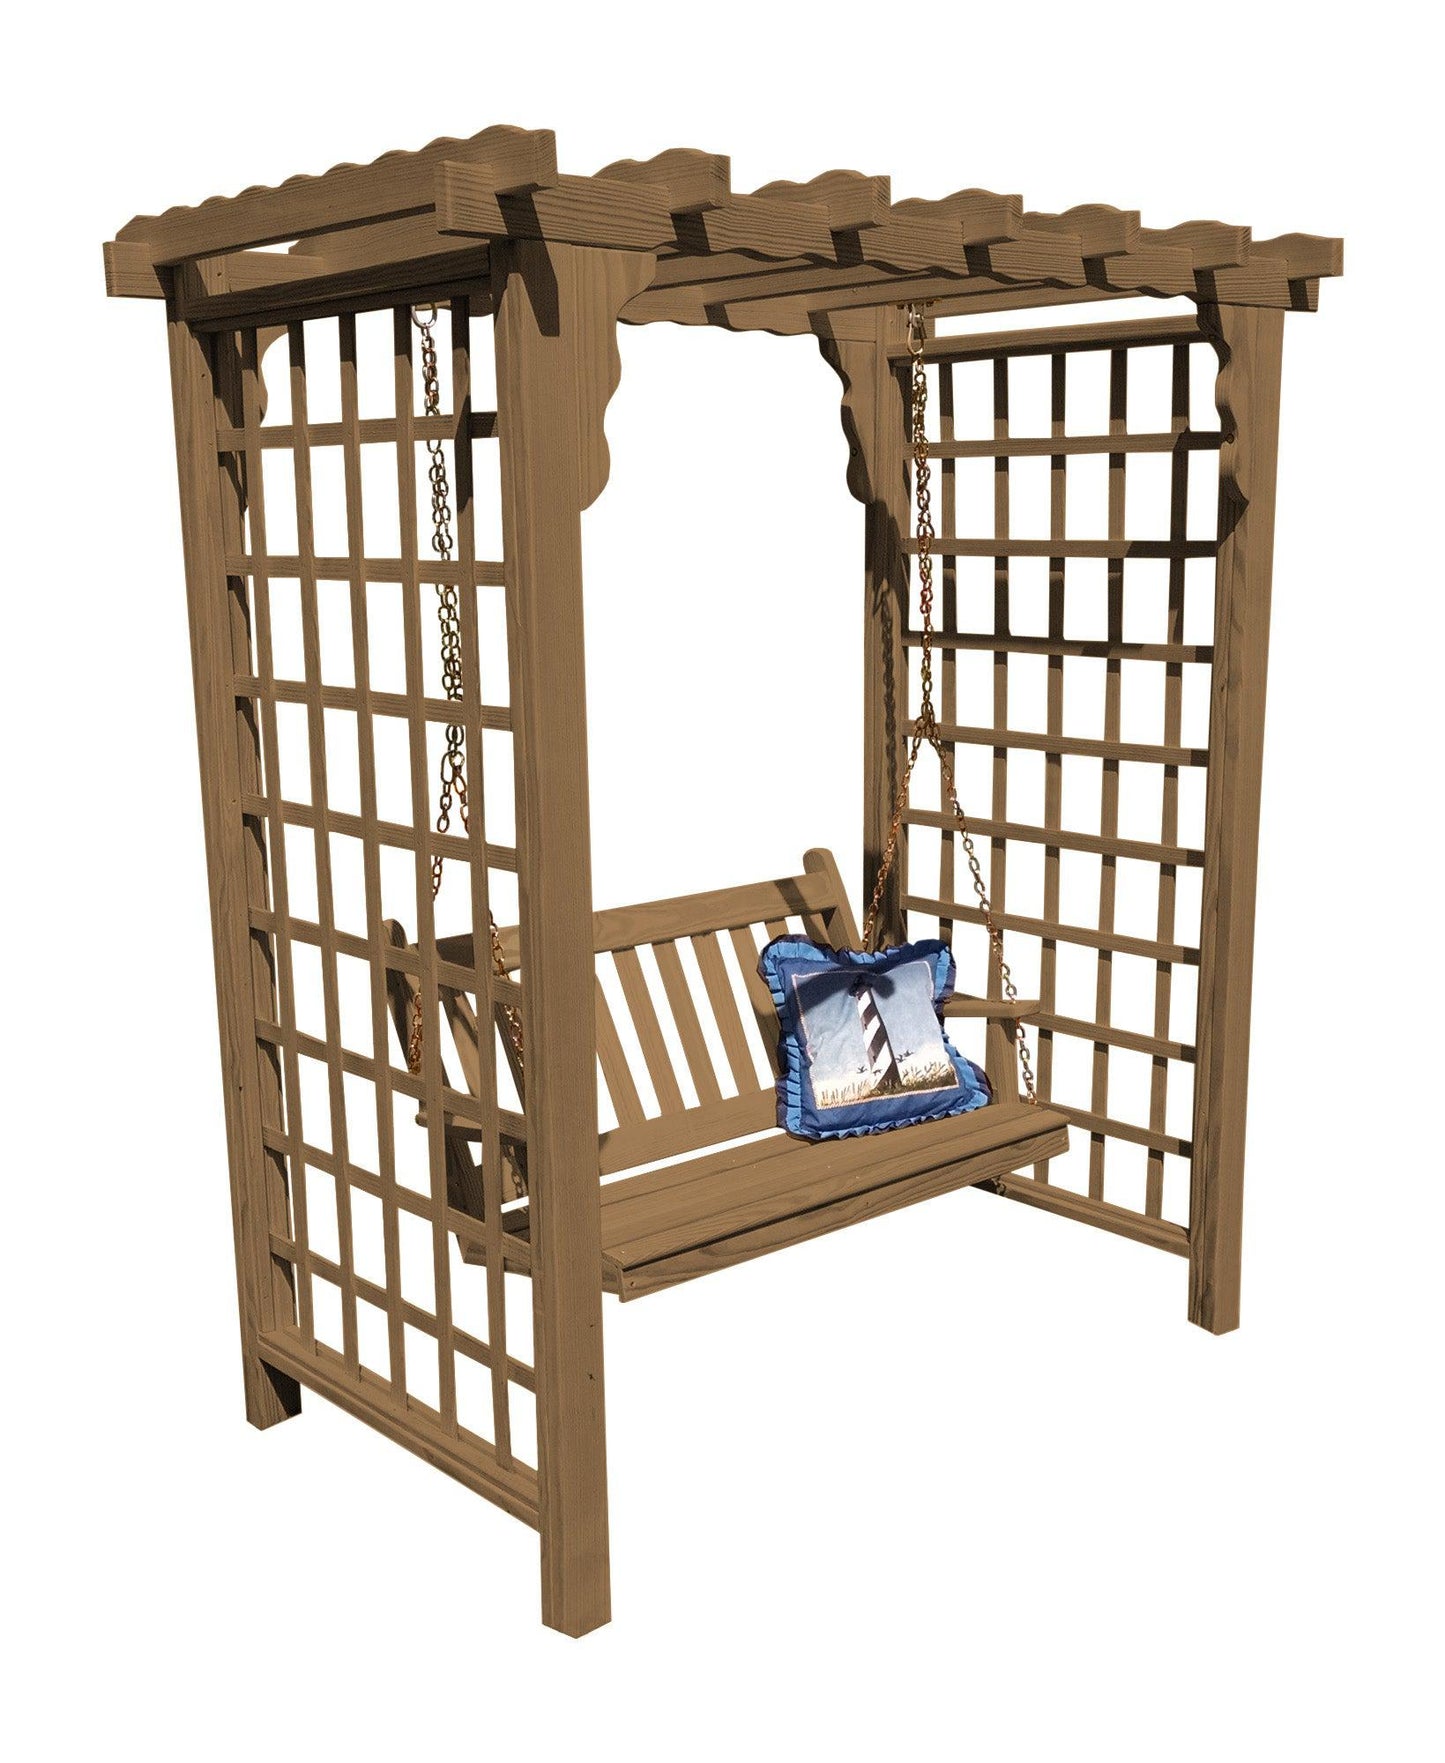 A&L FURNITURE CO. 6' Covington Pressure Treated Pine Arbor & Swing - LEAD TIME TO SHIP 10 BUSINESS DAYS